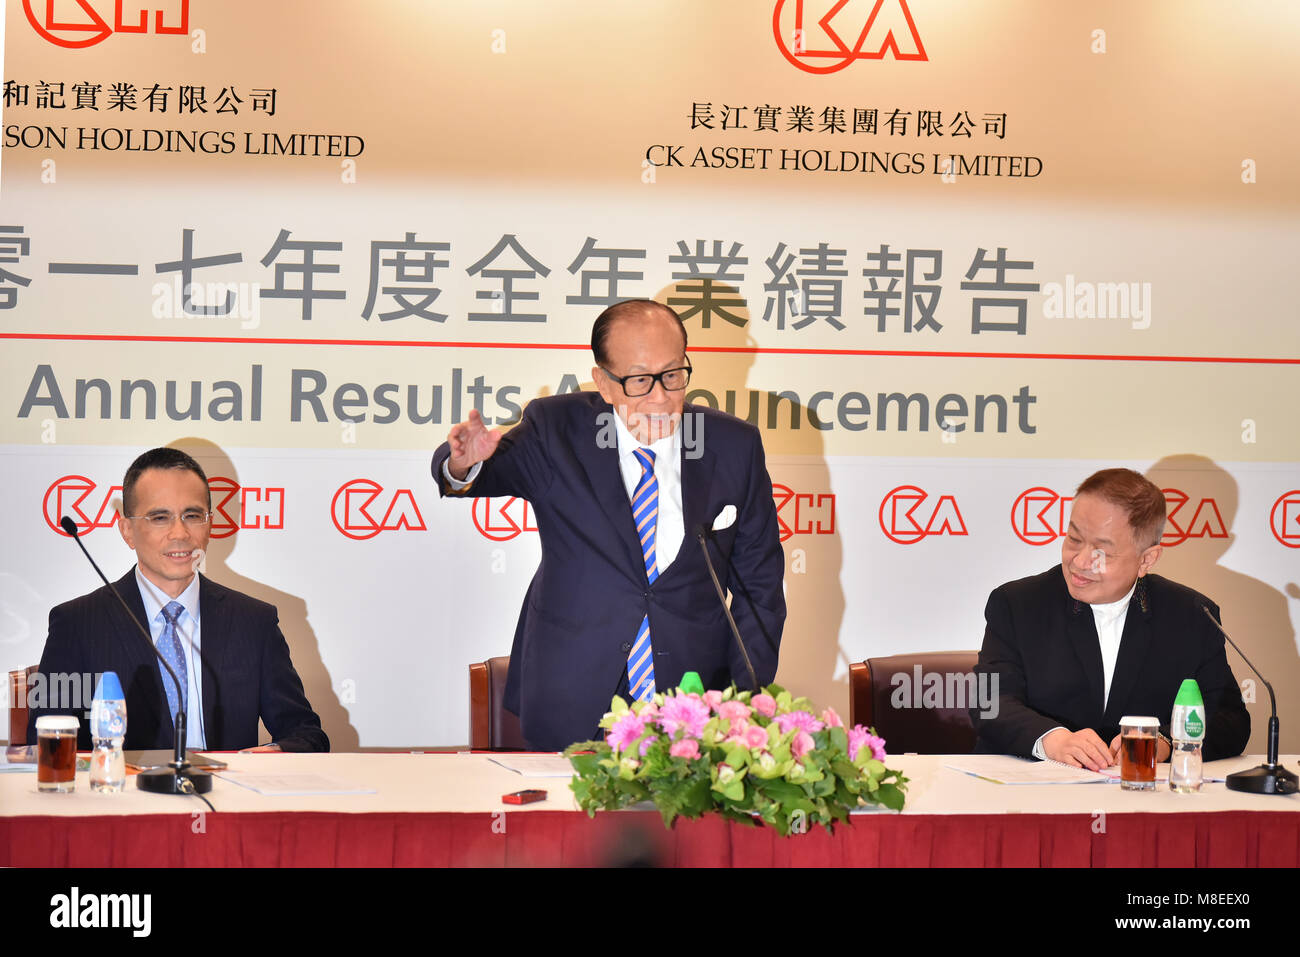 Hong Kong. 16th Mar, 2018. Hong Kong tycoon Li Ka-shing (C) attends a press conference in south China's Hong Kong, March 16, 2018. Li Ka-shing said on Friday that he is retiring from his business empire. Li said he would officially step down as the chairman of CK Hutchison Holdings Ltd. and CK Asset holdings Ltd. at the annual general meeting of the company on May 10 and would serve as a senior adviser. He will be succeeded by his elder son Victor Li Tzar Kuoi. Credit: Wang Xi/Xinhua/Alamy Live News Stock Photo